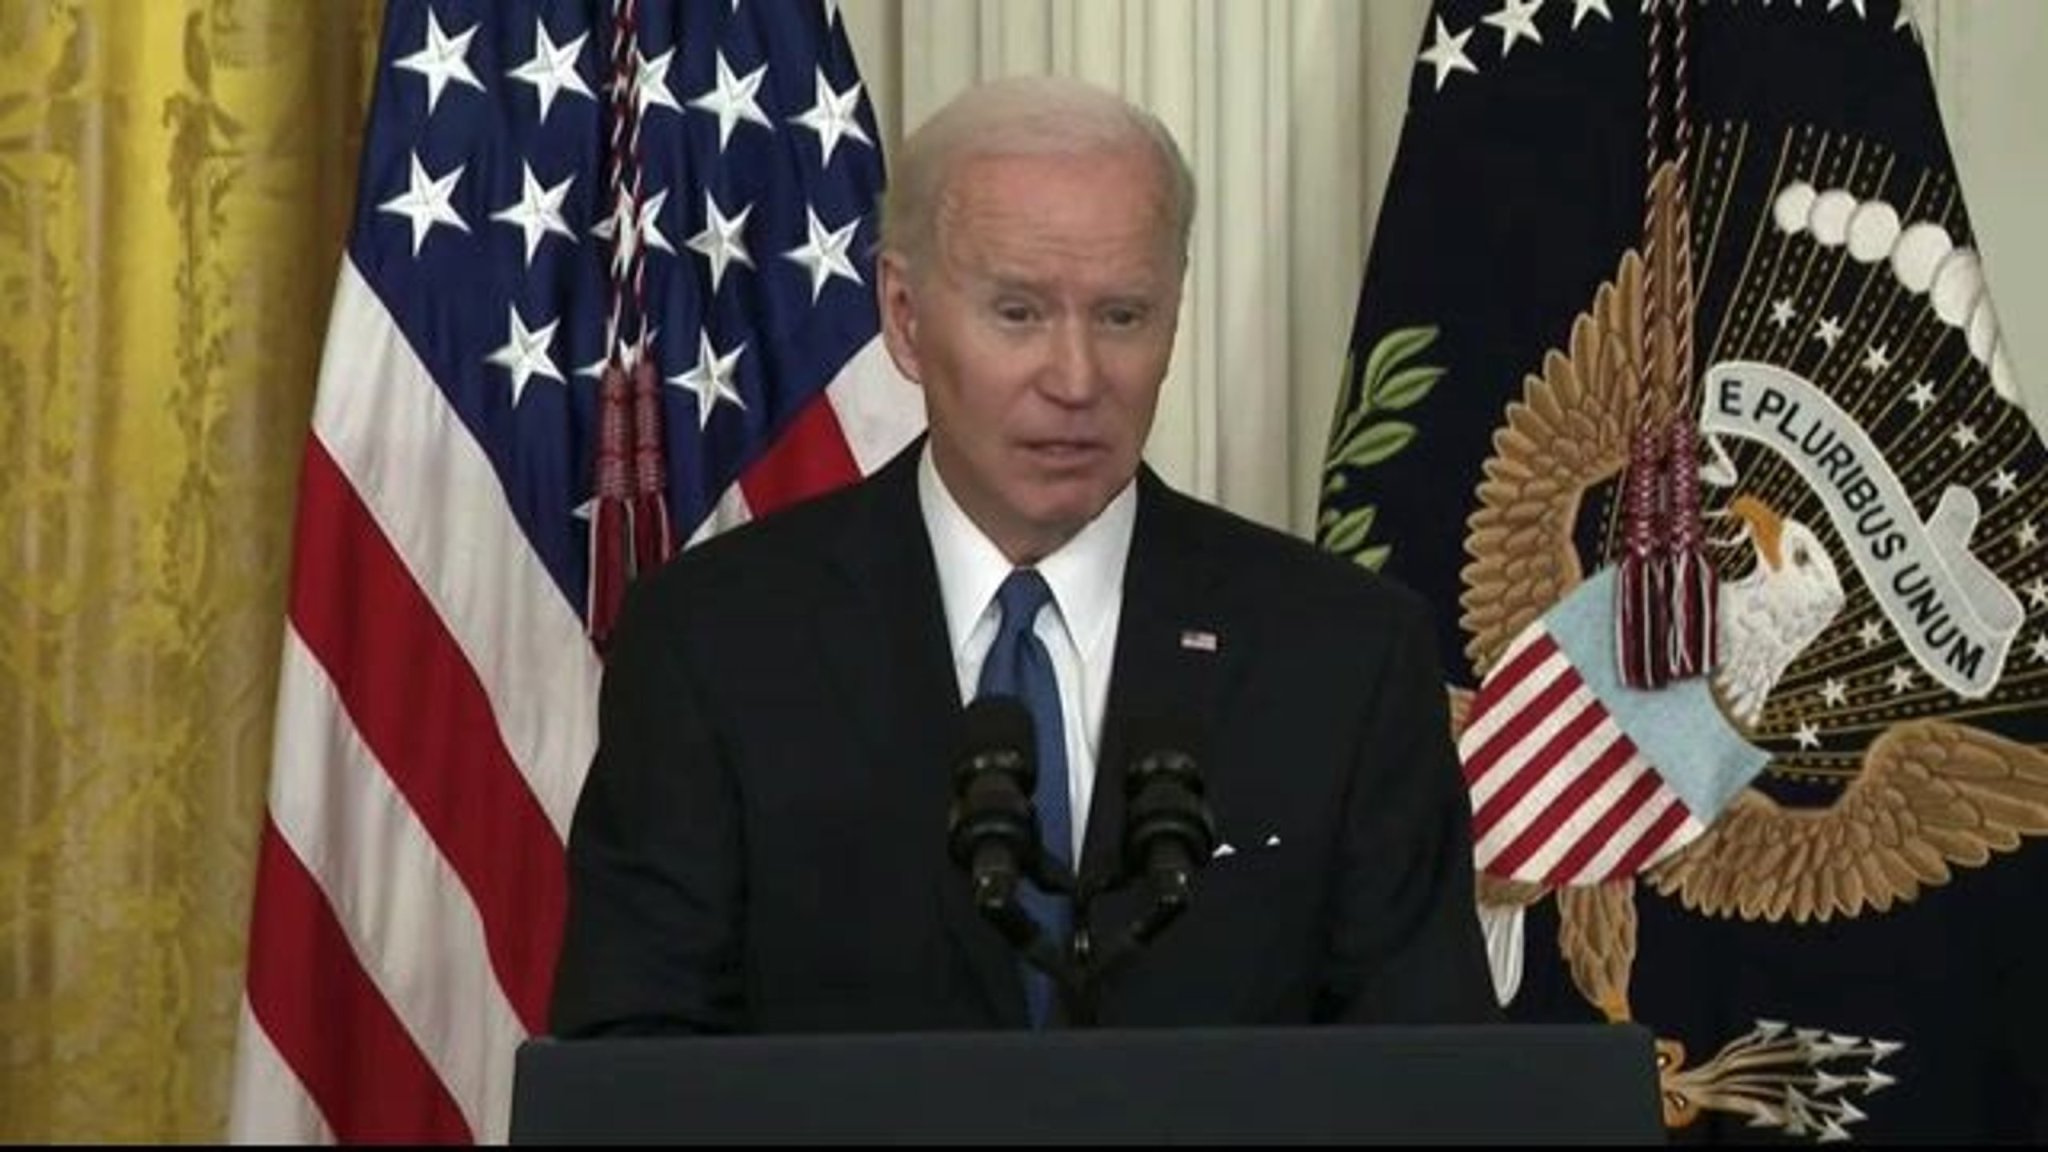 Biden on GOP efforts to repeal Obamacare: “Instead of destroying the Affordable Care Act, let’s keep building on it.”